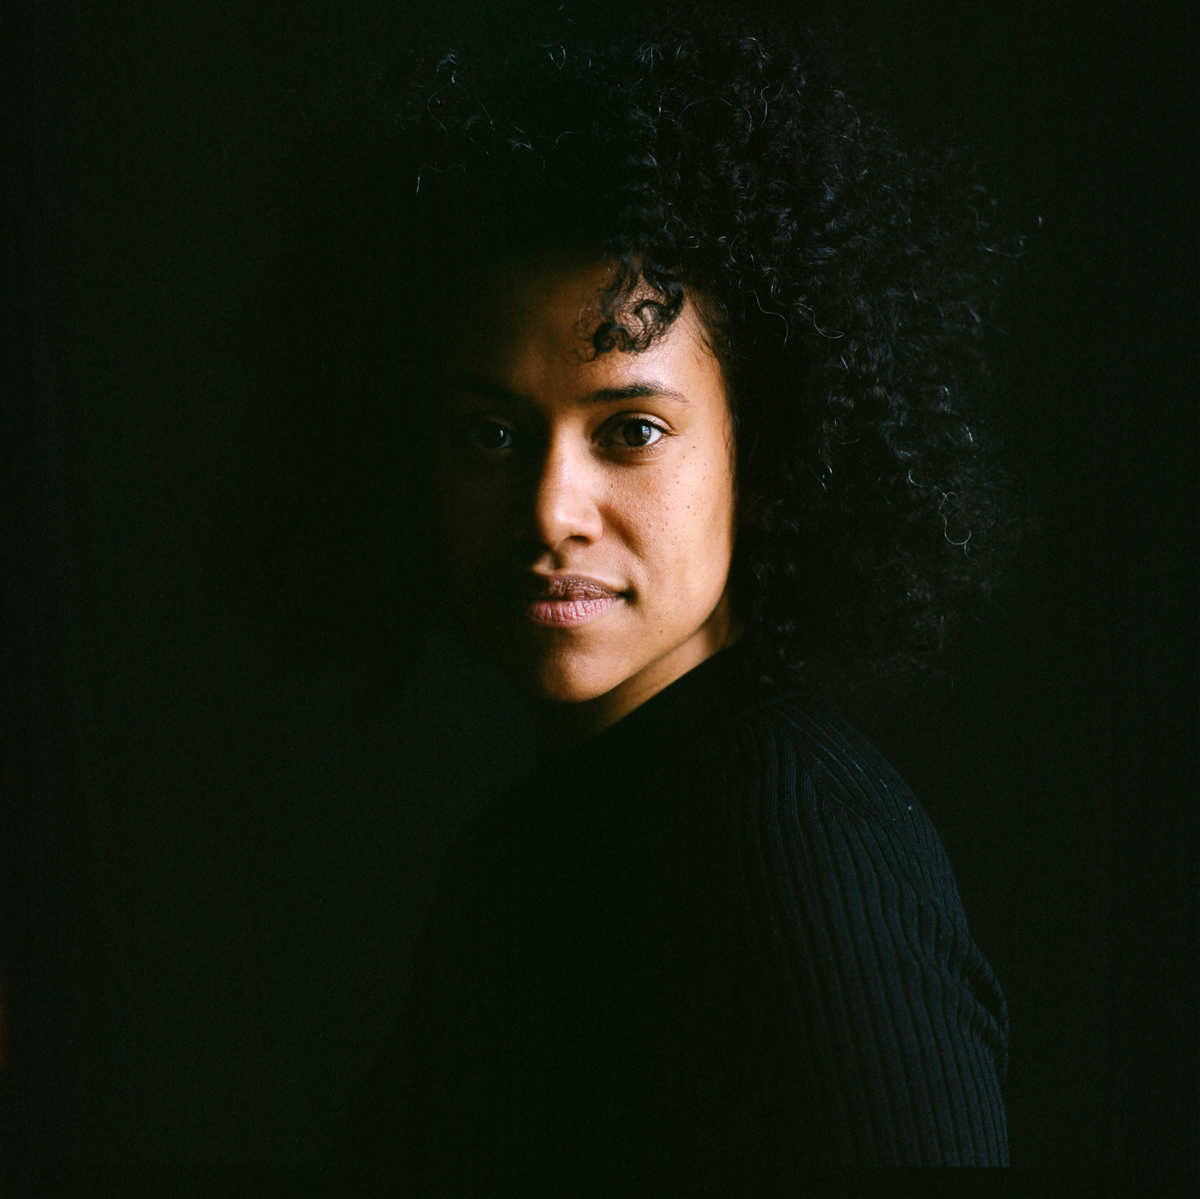 Portrait of a Black woman with dark, curly hair and wearing a black sweater staring straight at the camera, with the right side of her face obscured by shadow.